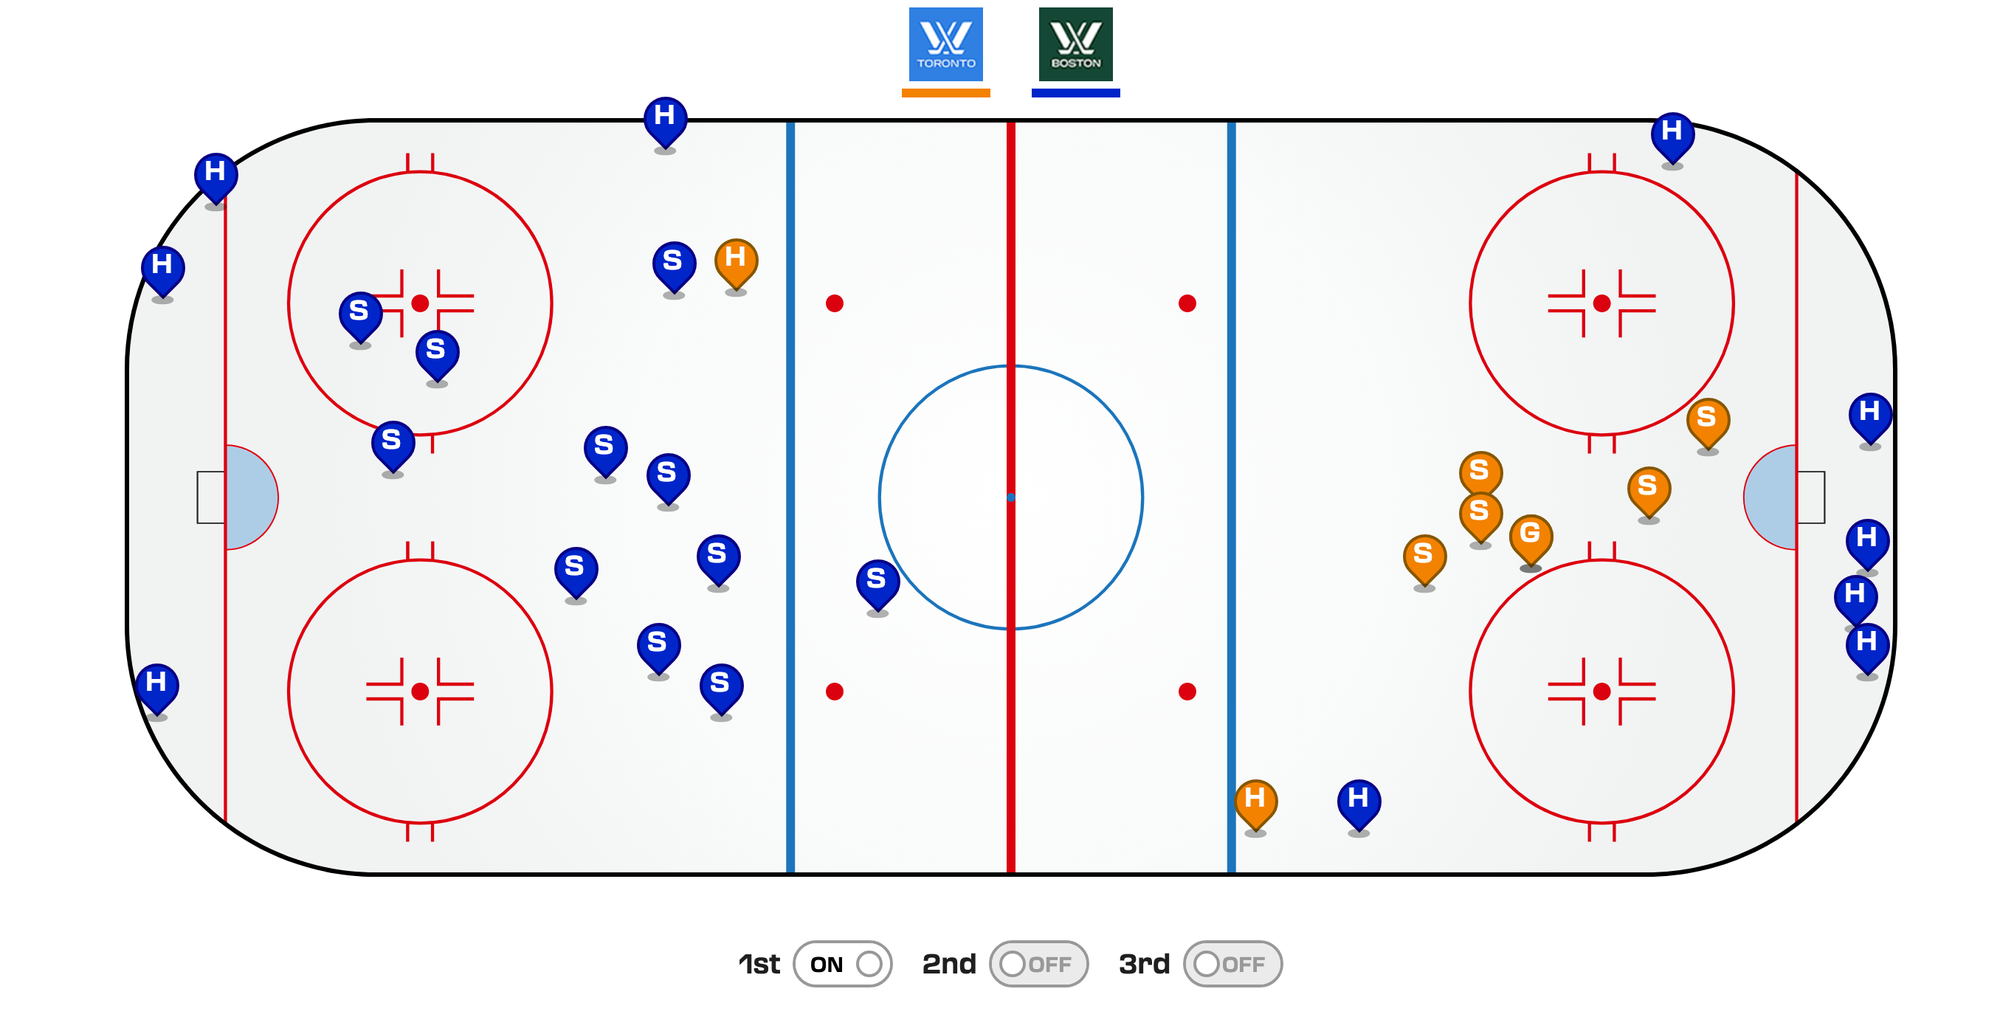 A map of an ice rink, with 11 blue markers representing Boston shots and 6 orange markers representing Toronto shots. The Boston shots are almost all on the perimeter, while the Toronto shots are largely in the slot.